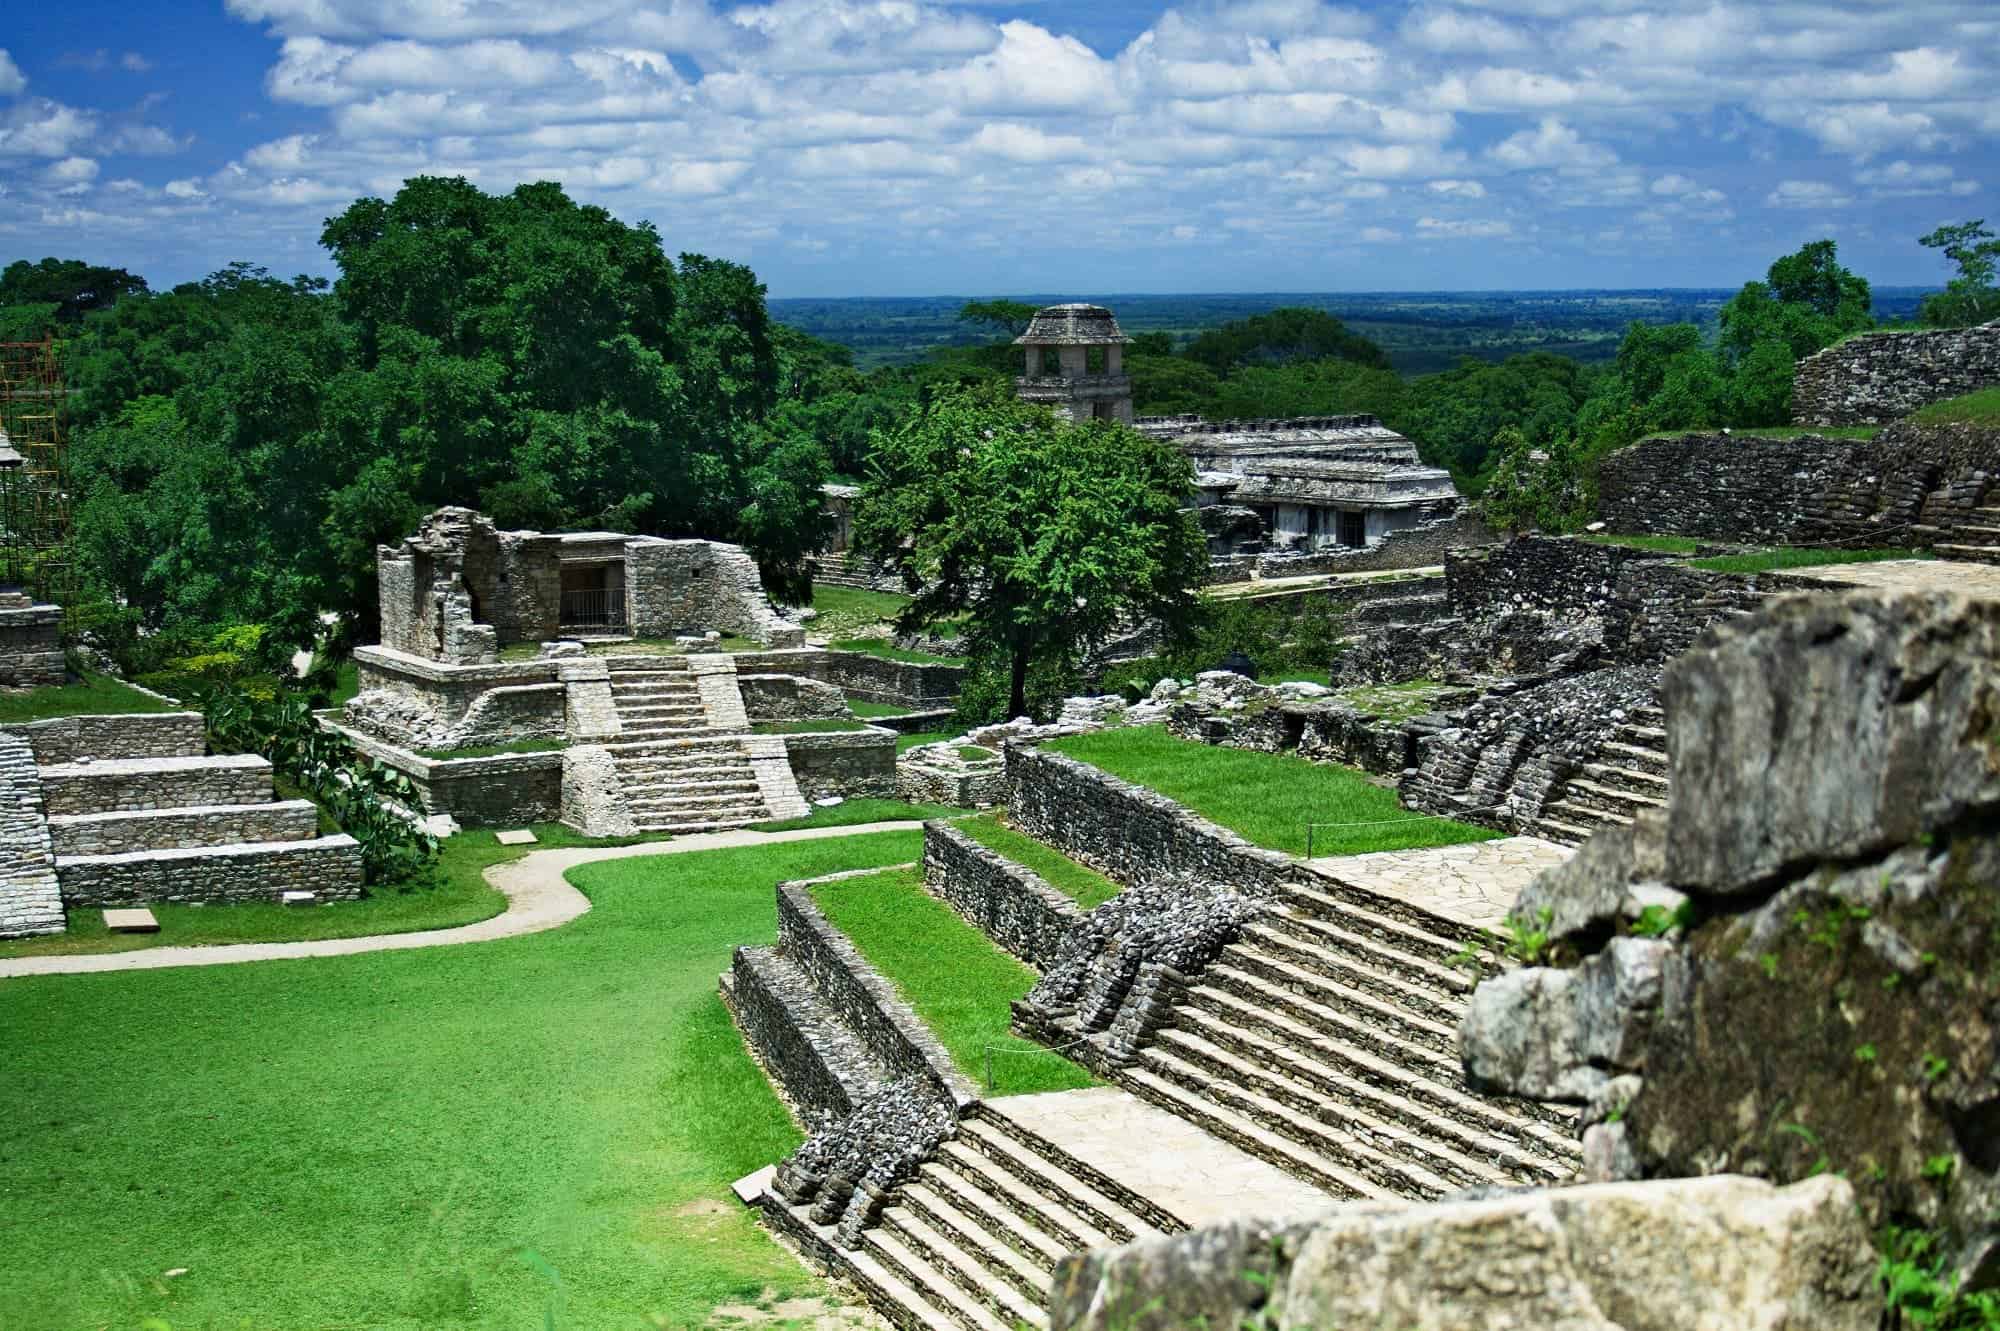 Overview of the central plaza of the Mayan city of Palenque (Chiapas, Mexico), an example of Classic Maya architecture. Image credits: Jan Harenburg.